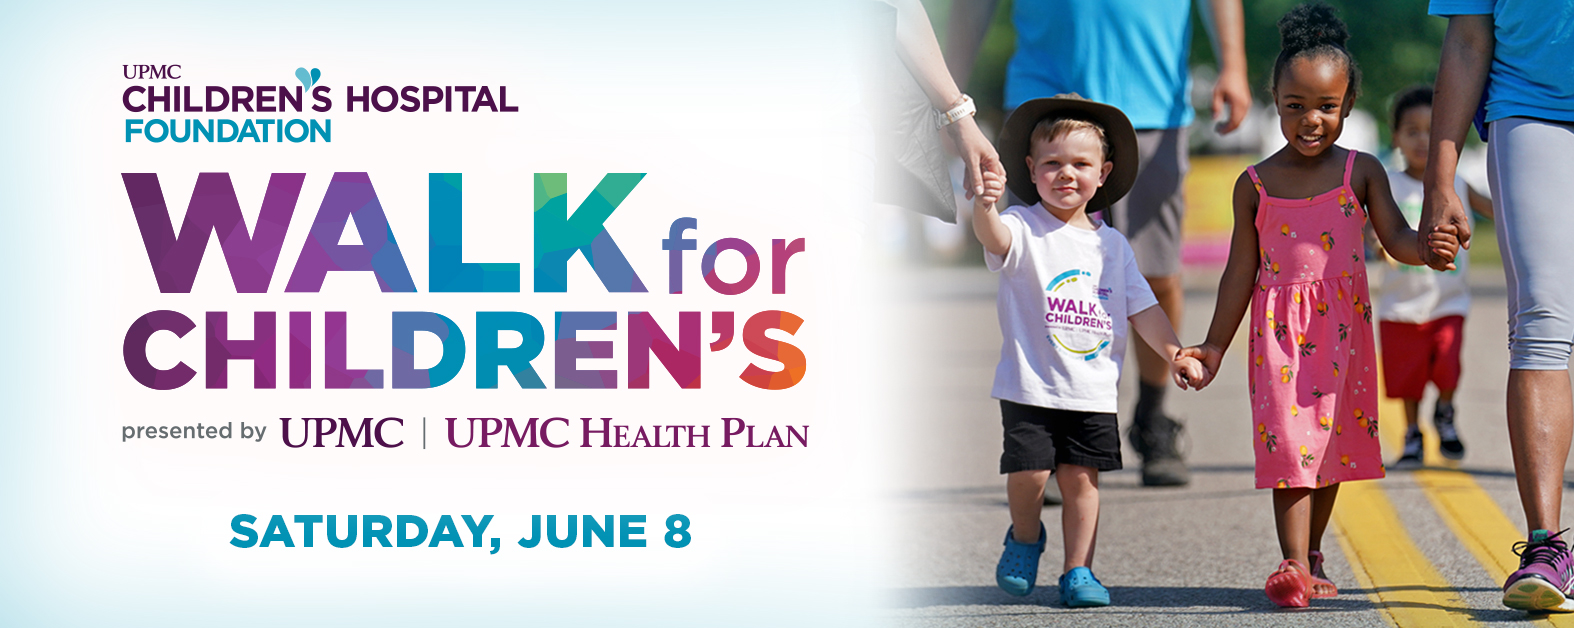 Saturday, June 8 - Walk for Children's presented by UPMC | UPMC Health Plan - Every Step Counts - photo shows two children walking together at the last Walk